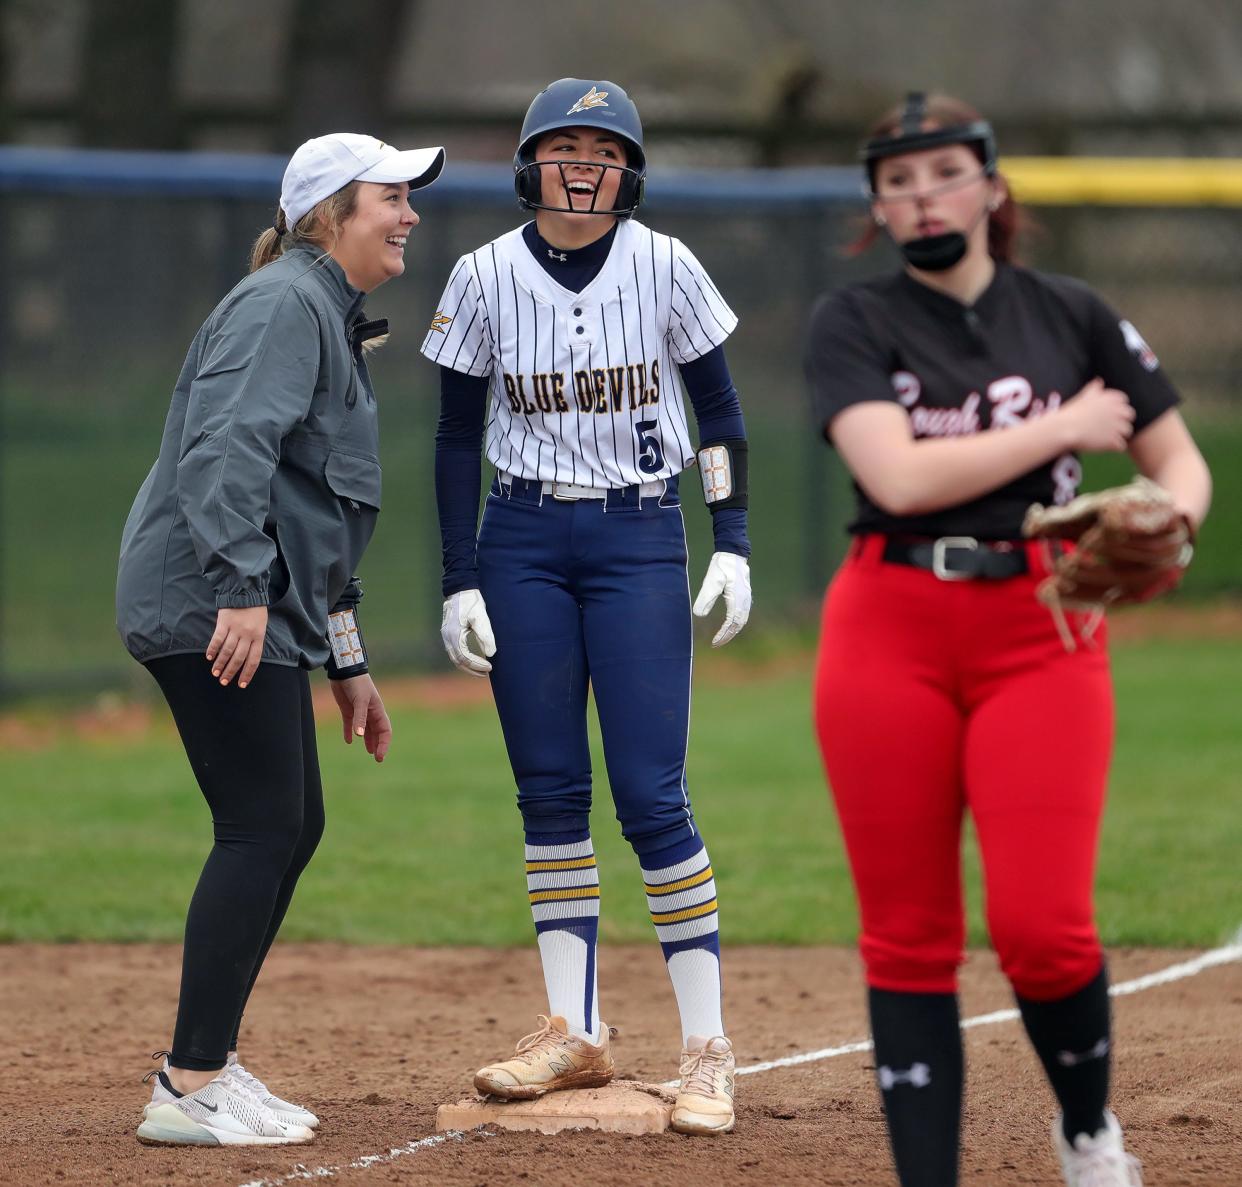 Tallmadge's Leila Staszak celebrates with coach Brittany Lightel at third base during a game against Kent Roosevelt on April 10 in Tallmadge.